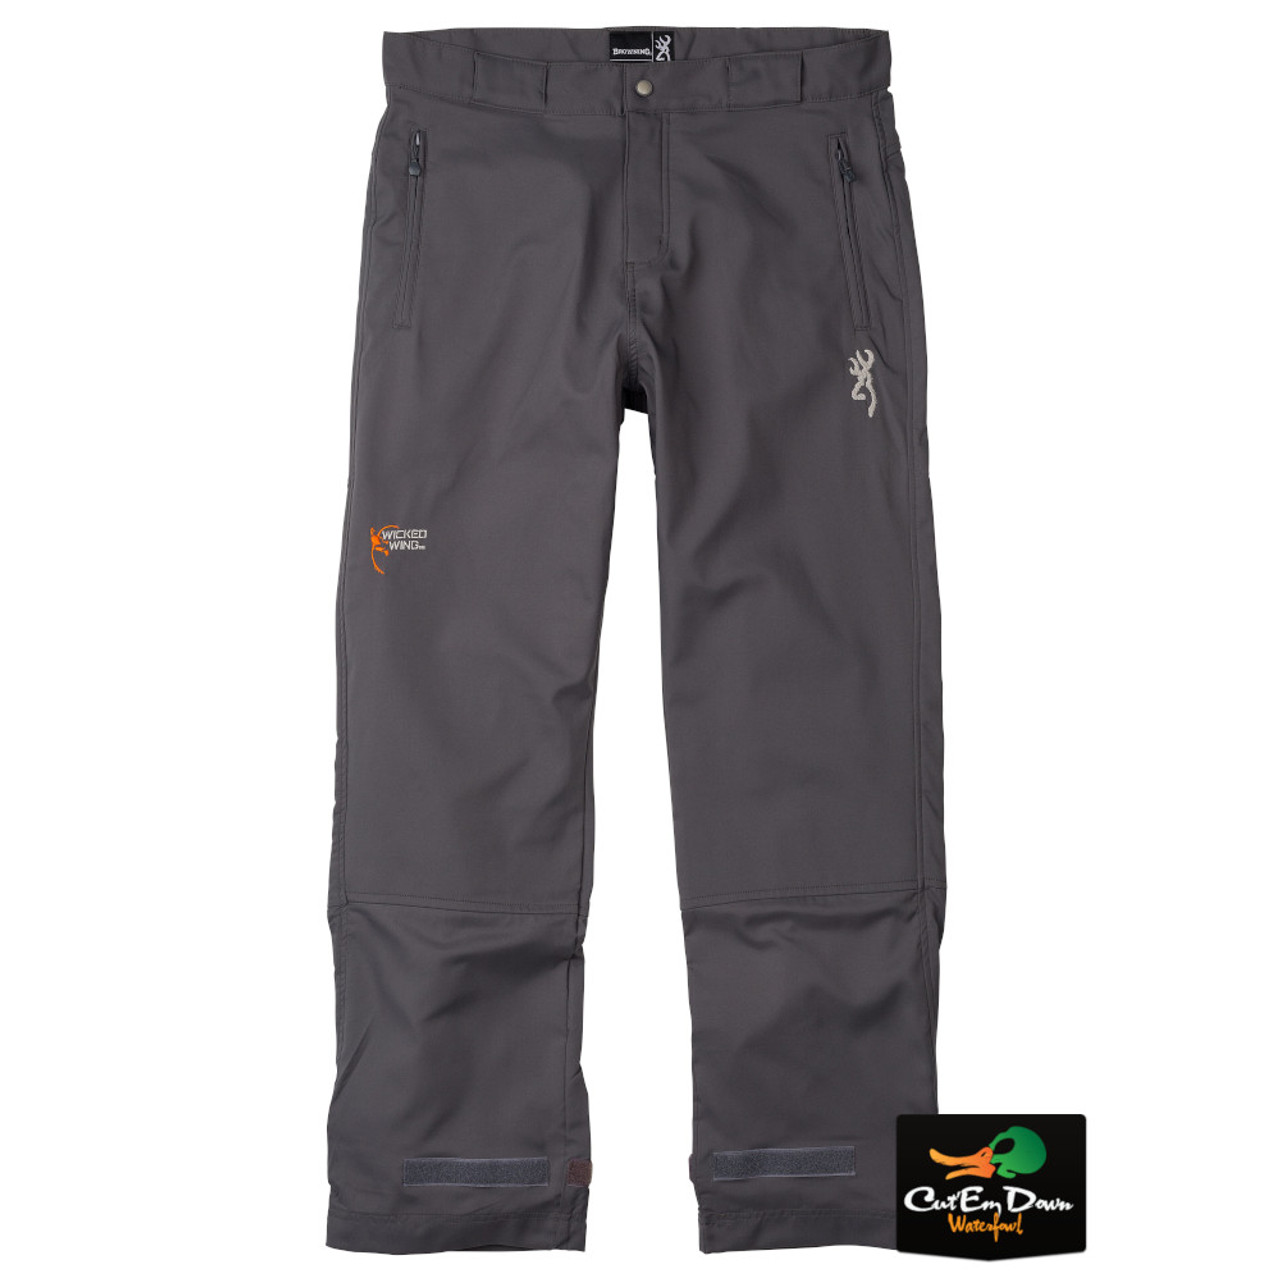 Browning Wicked Wing Wader Pants - Charcoal